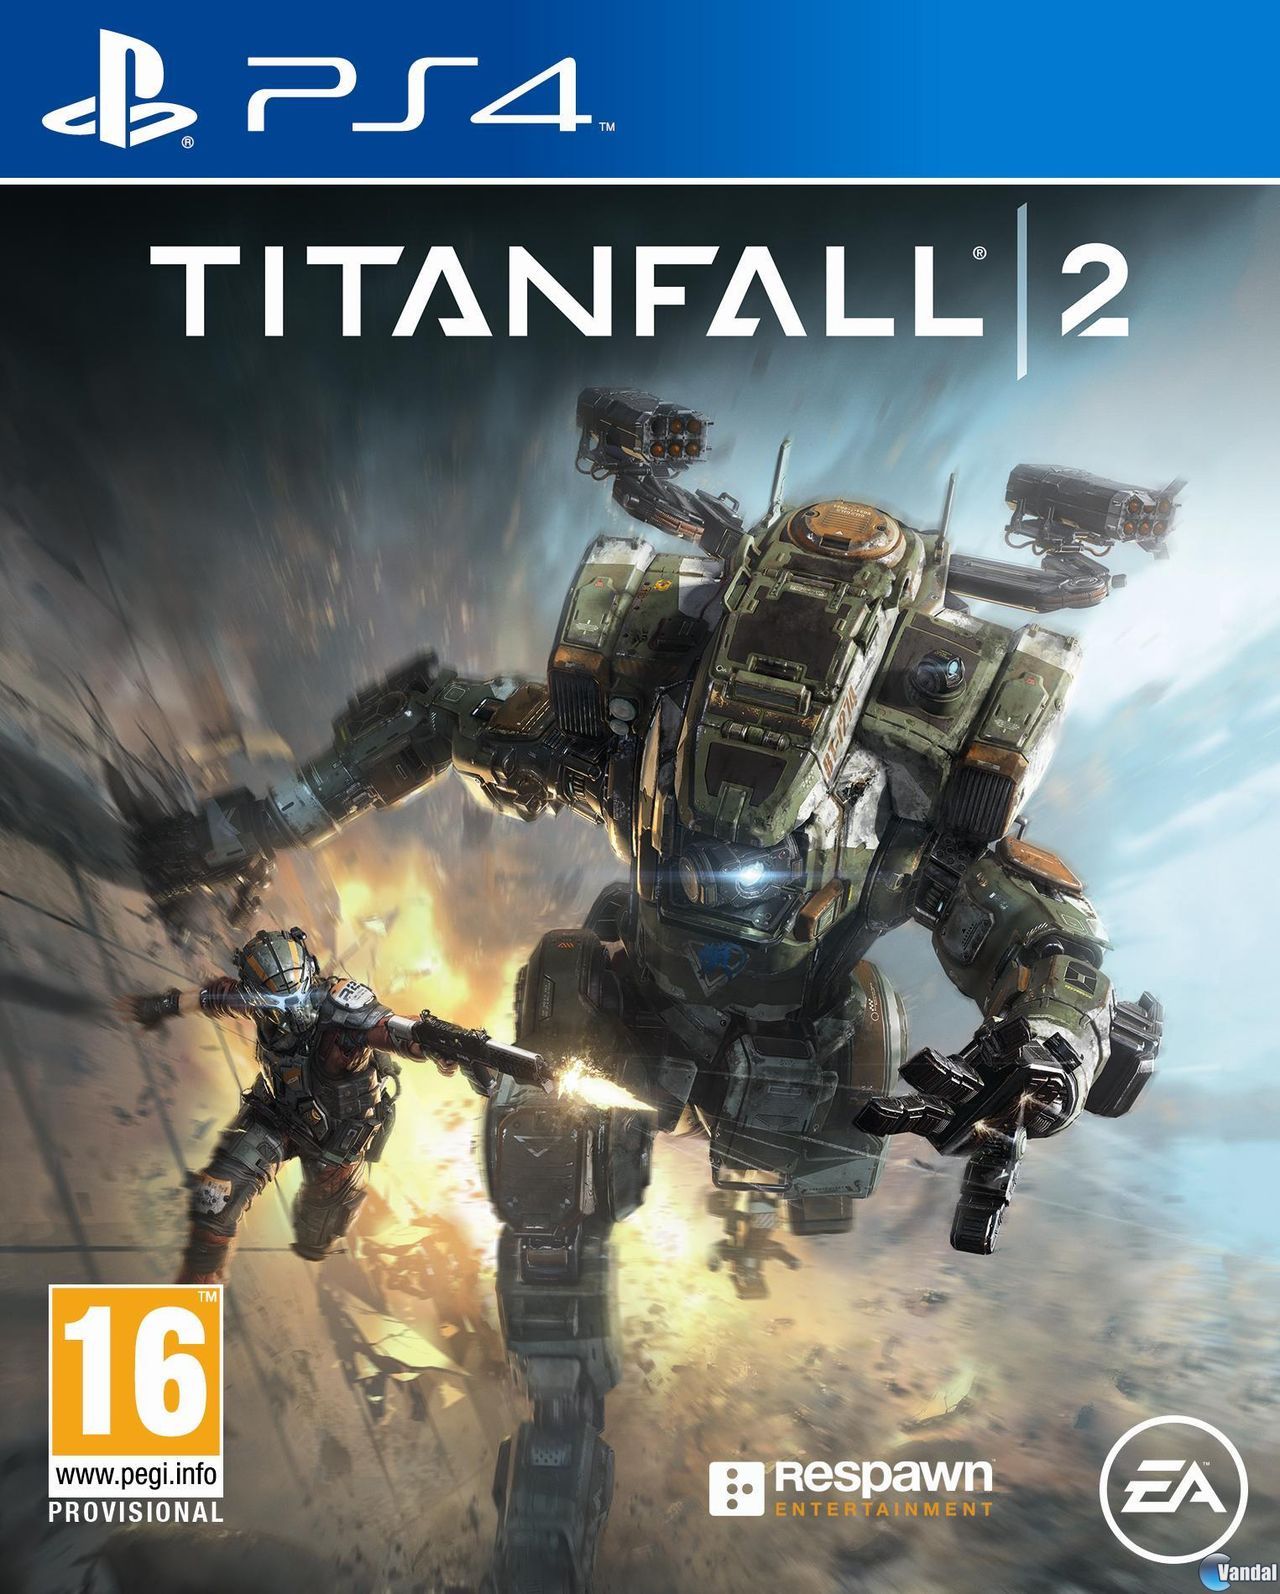 Titanfall 2 (PS4)